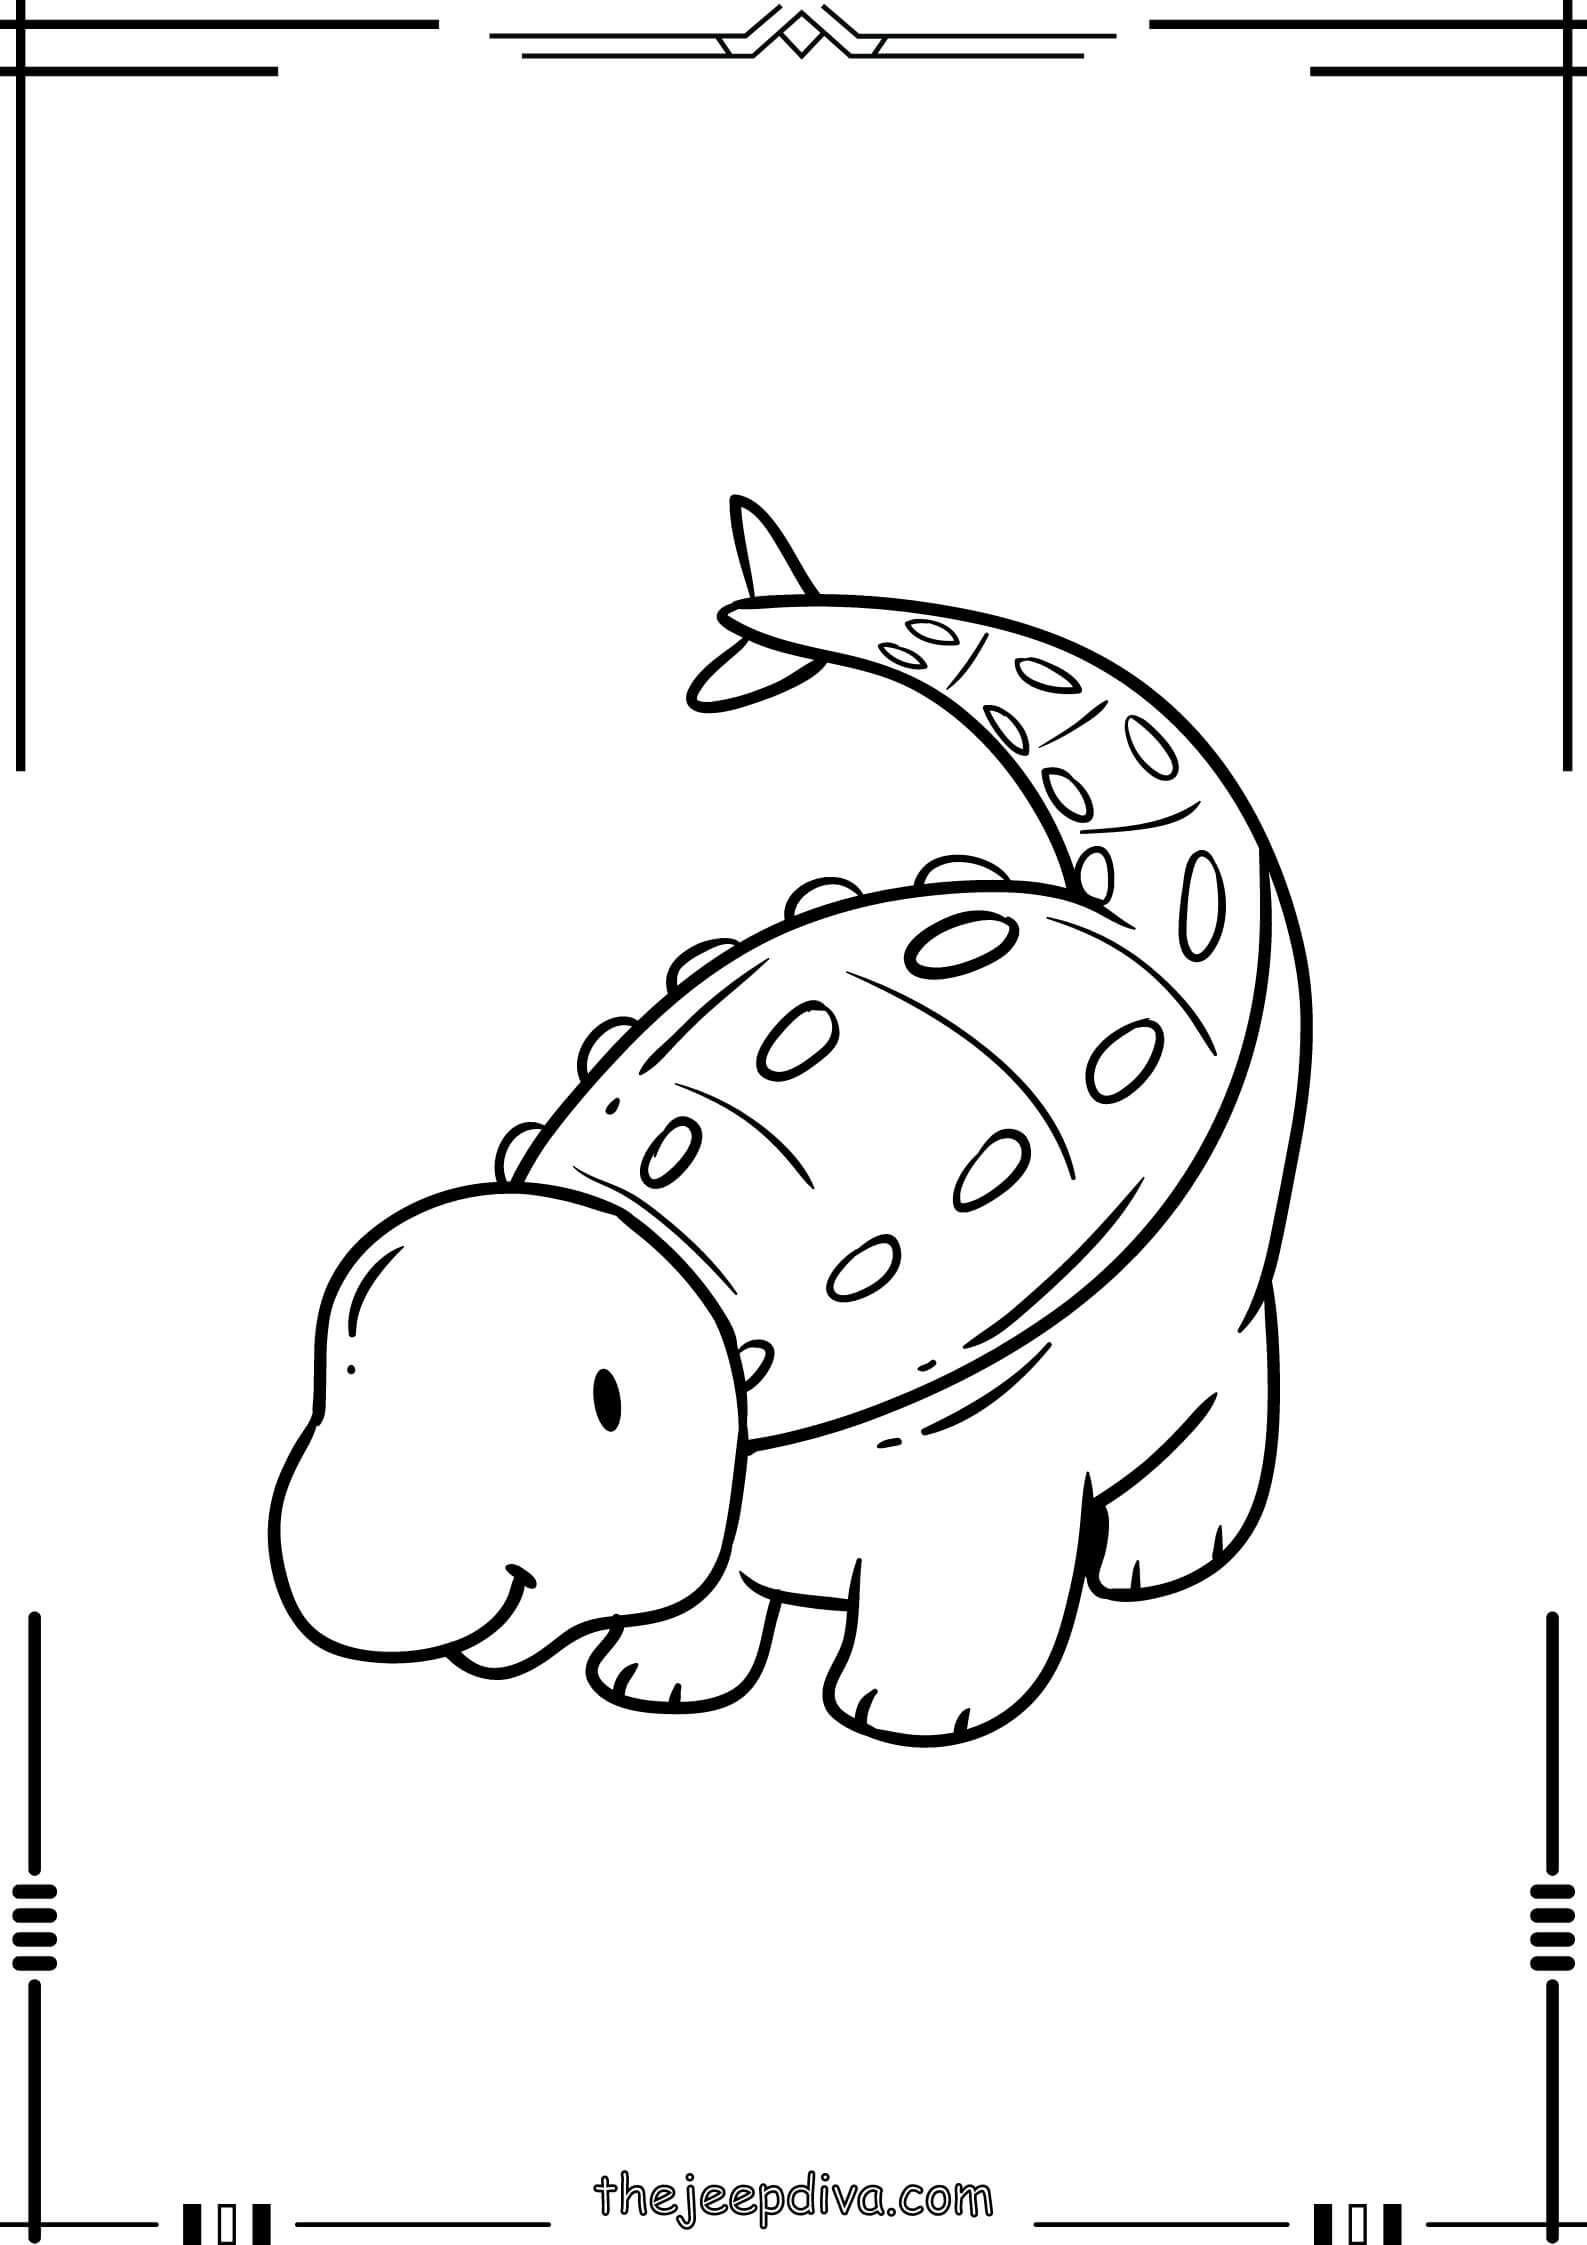 Dinosaur-Colouring-Pages-Easy-5